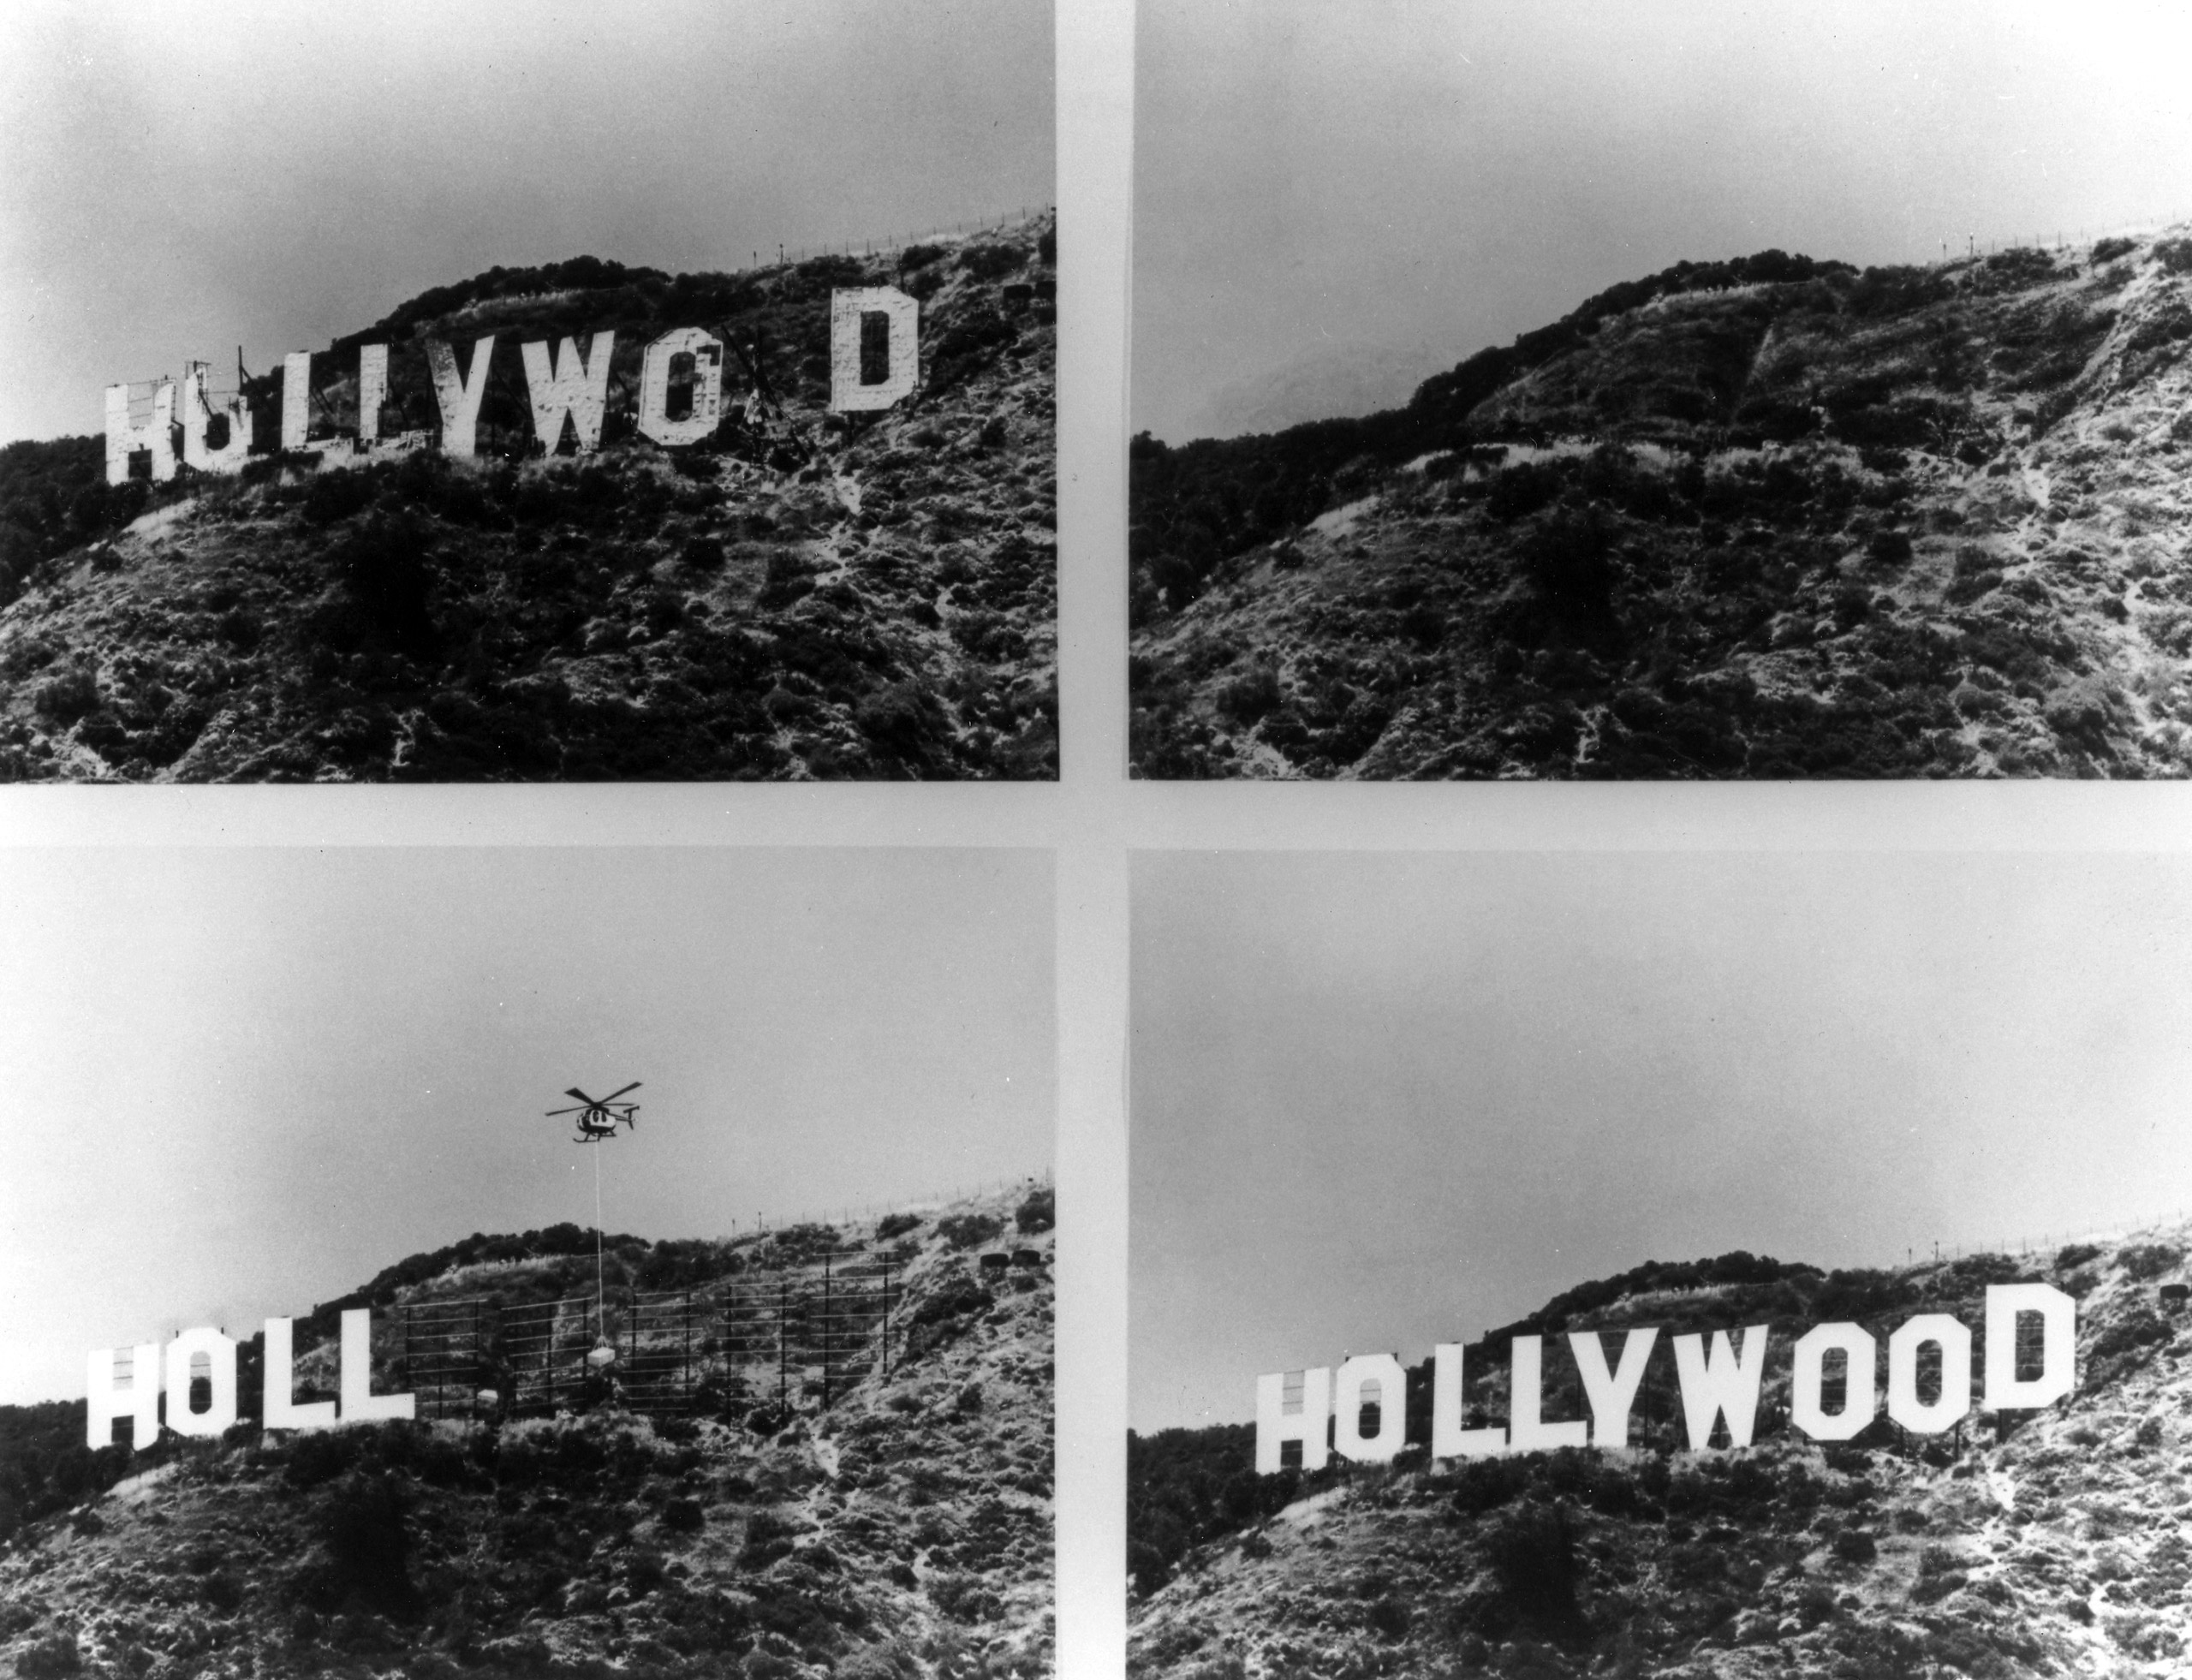 The Hollywood sign is reborn: 1978.